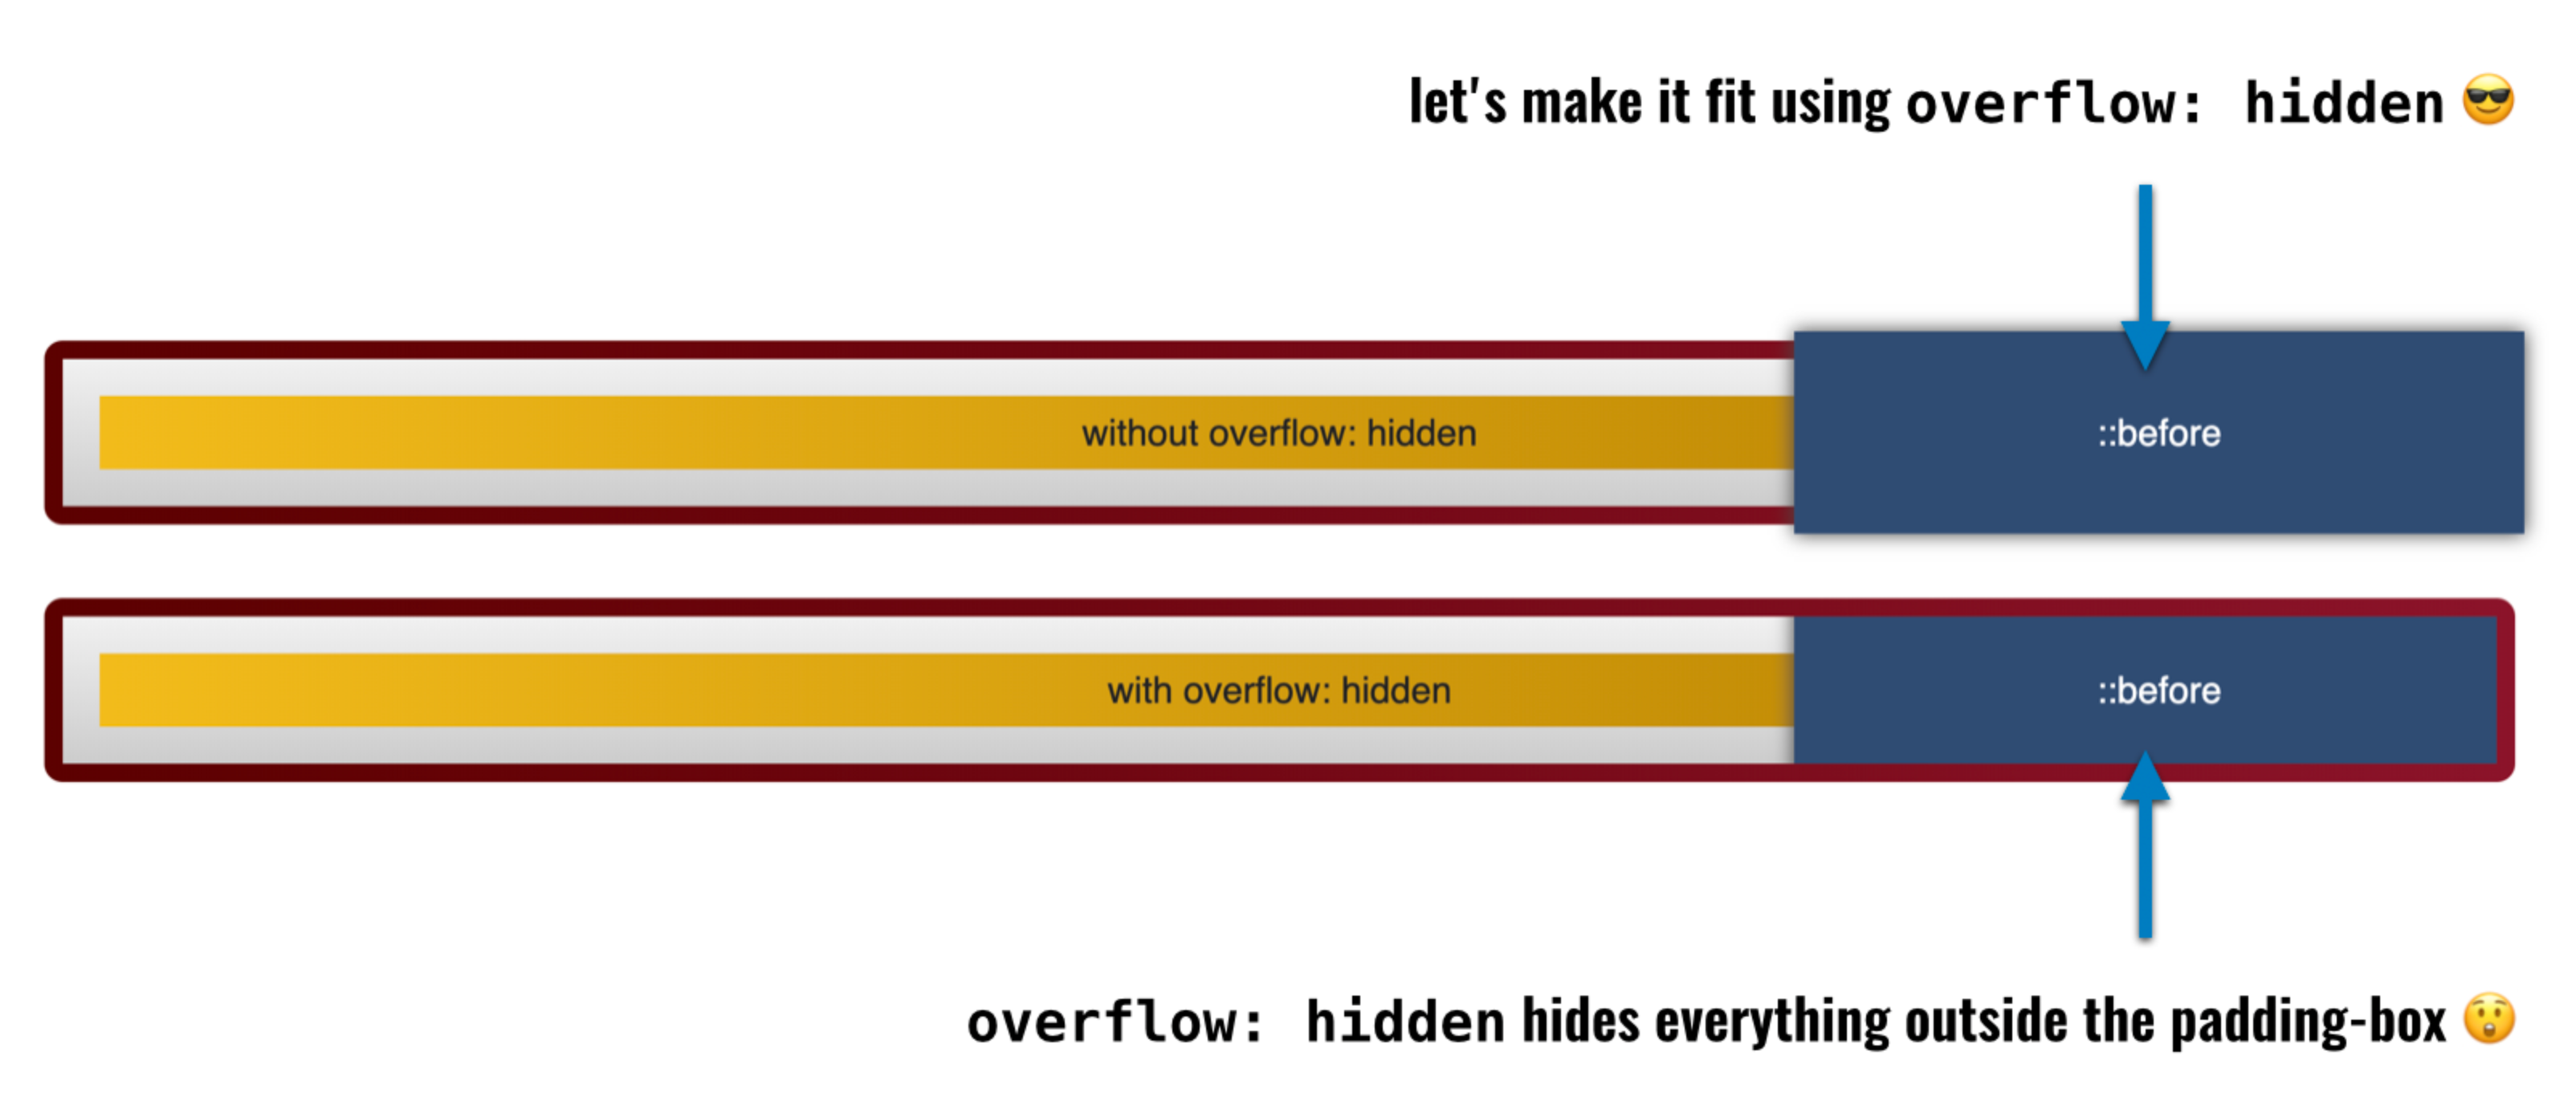 Example showing that "overflow: hidden" hides things on the padding box.